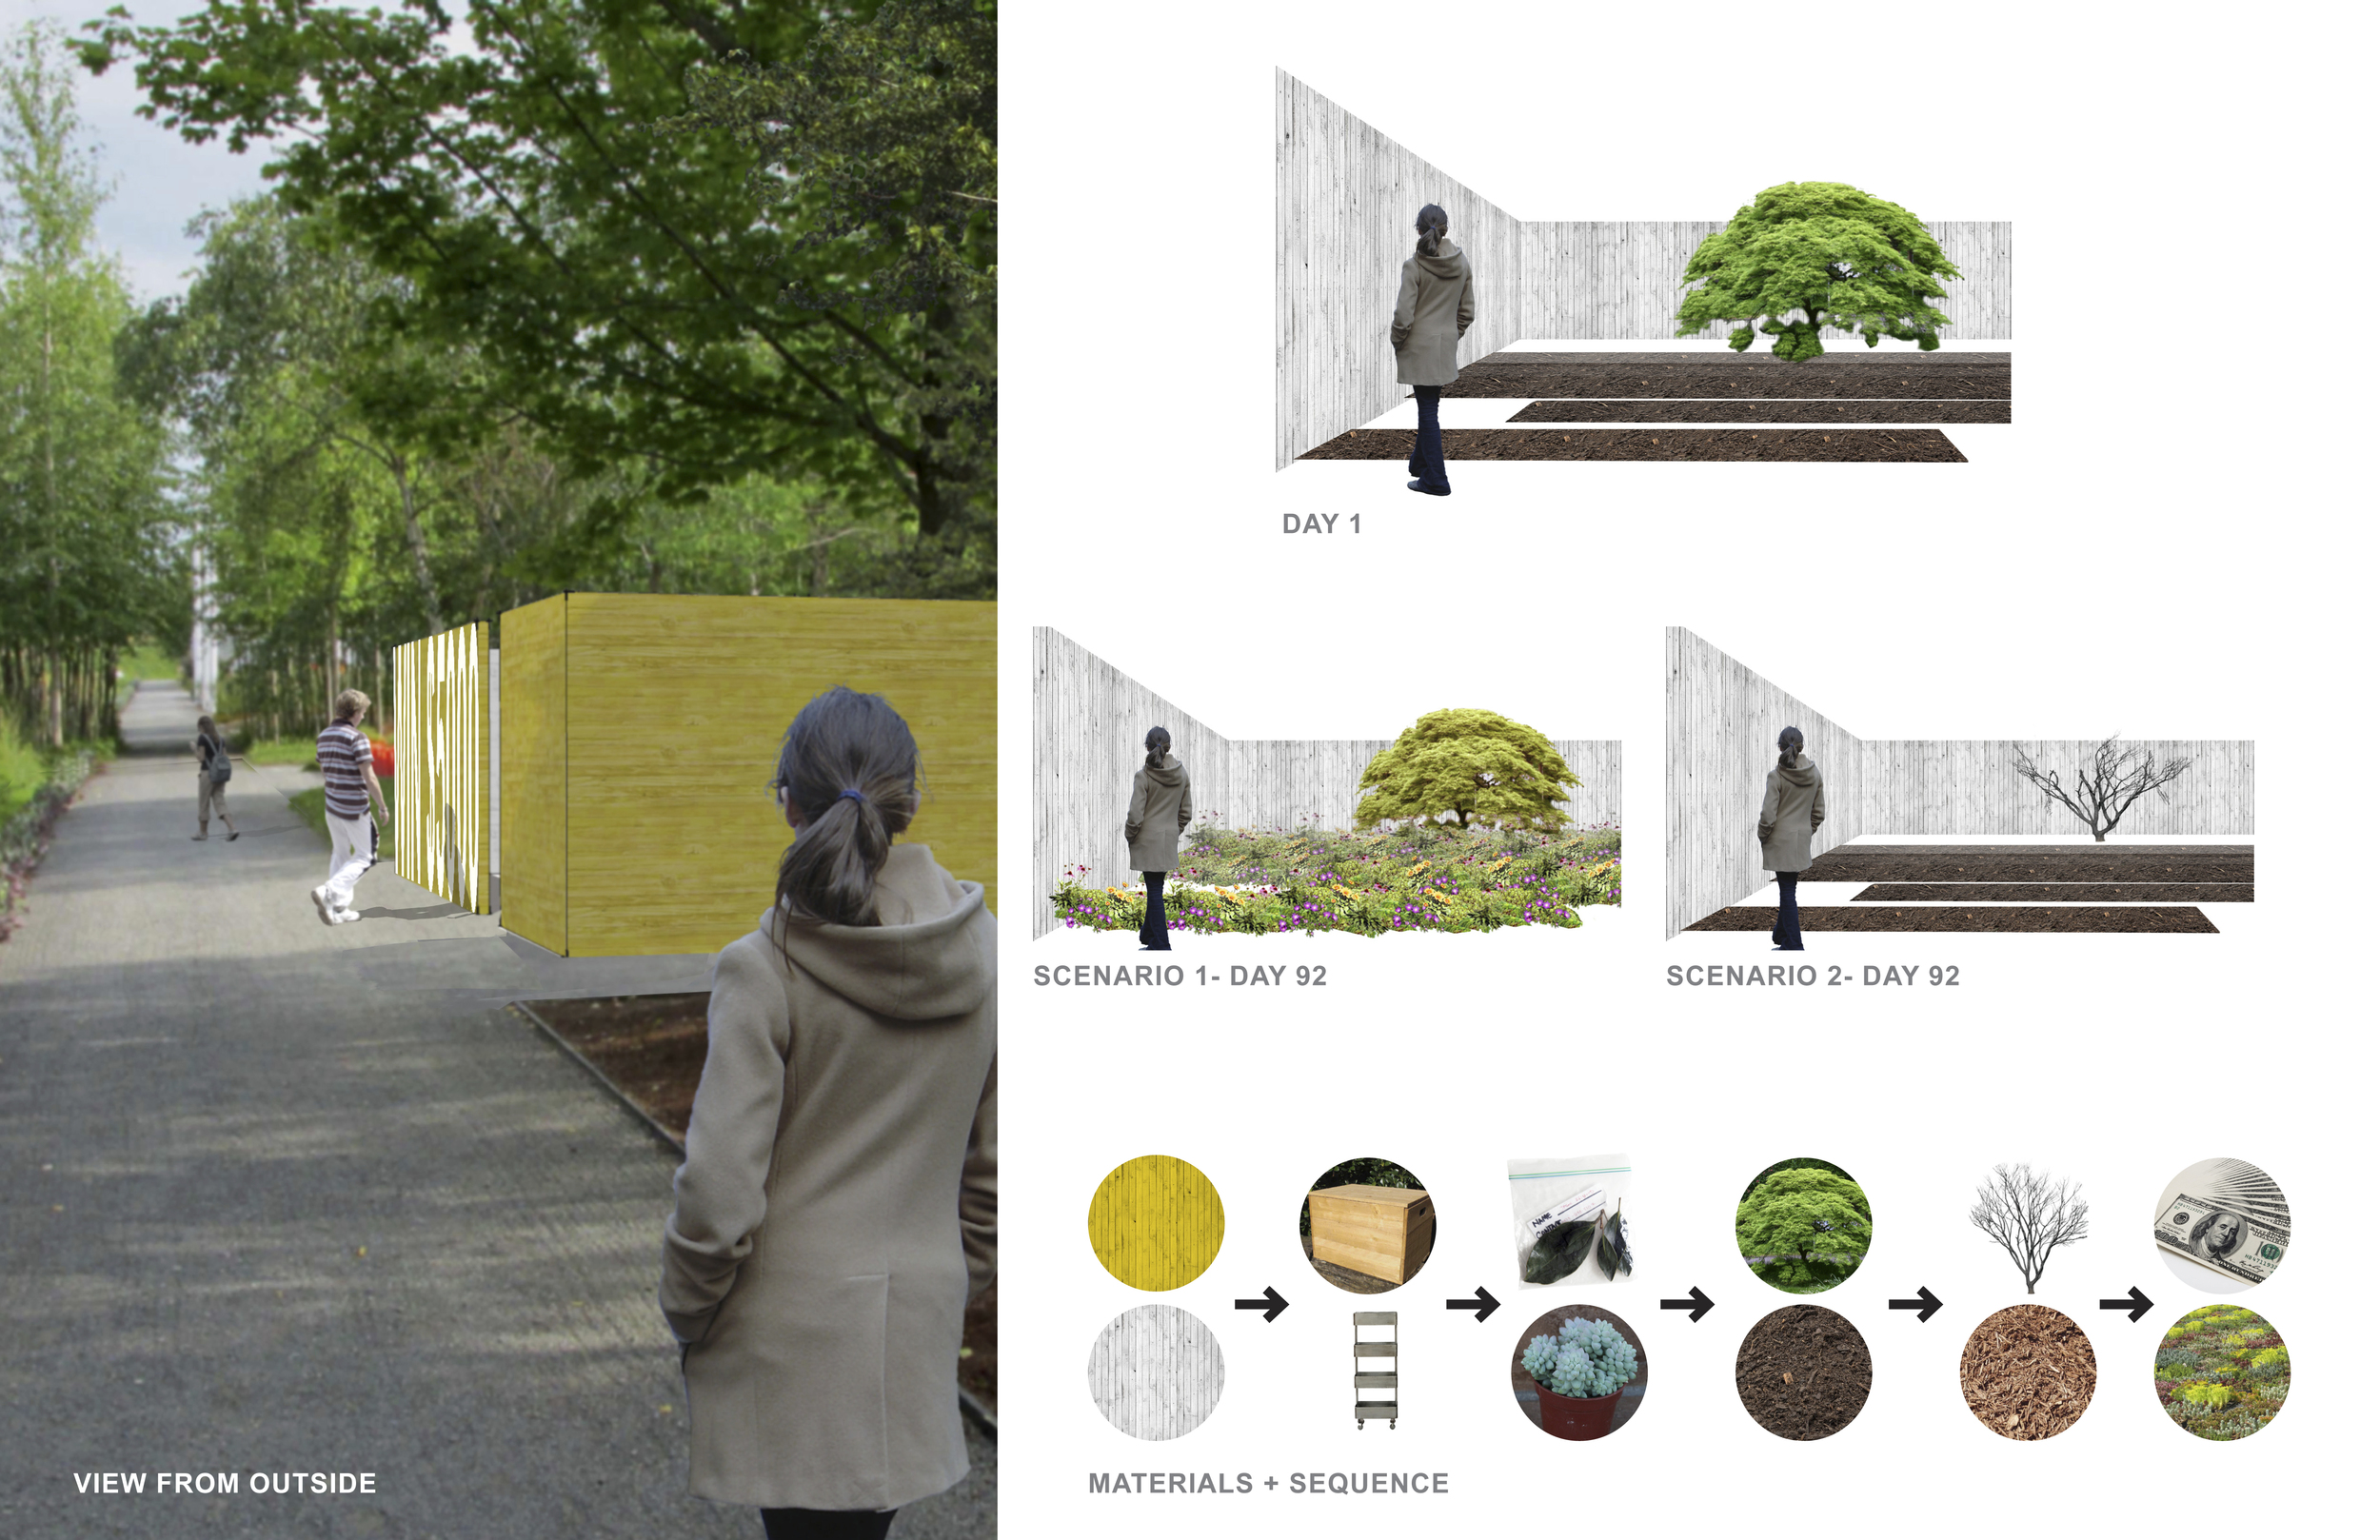   Project Location: &nbsp;Reford Gardens,&nbsp;Québec, Canada  Submission:&nbsp; November 2014  Renderings By: &nbsp;Moody Landscape Architecture 